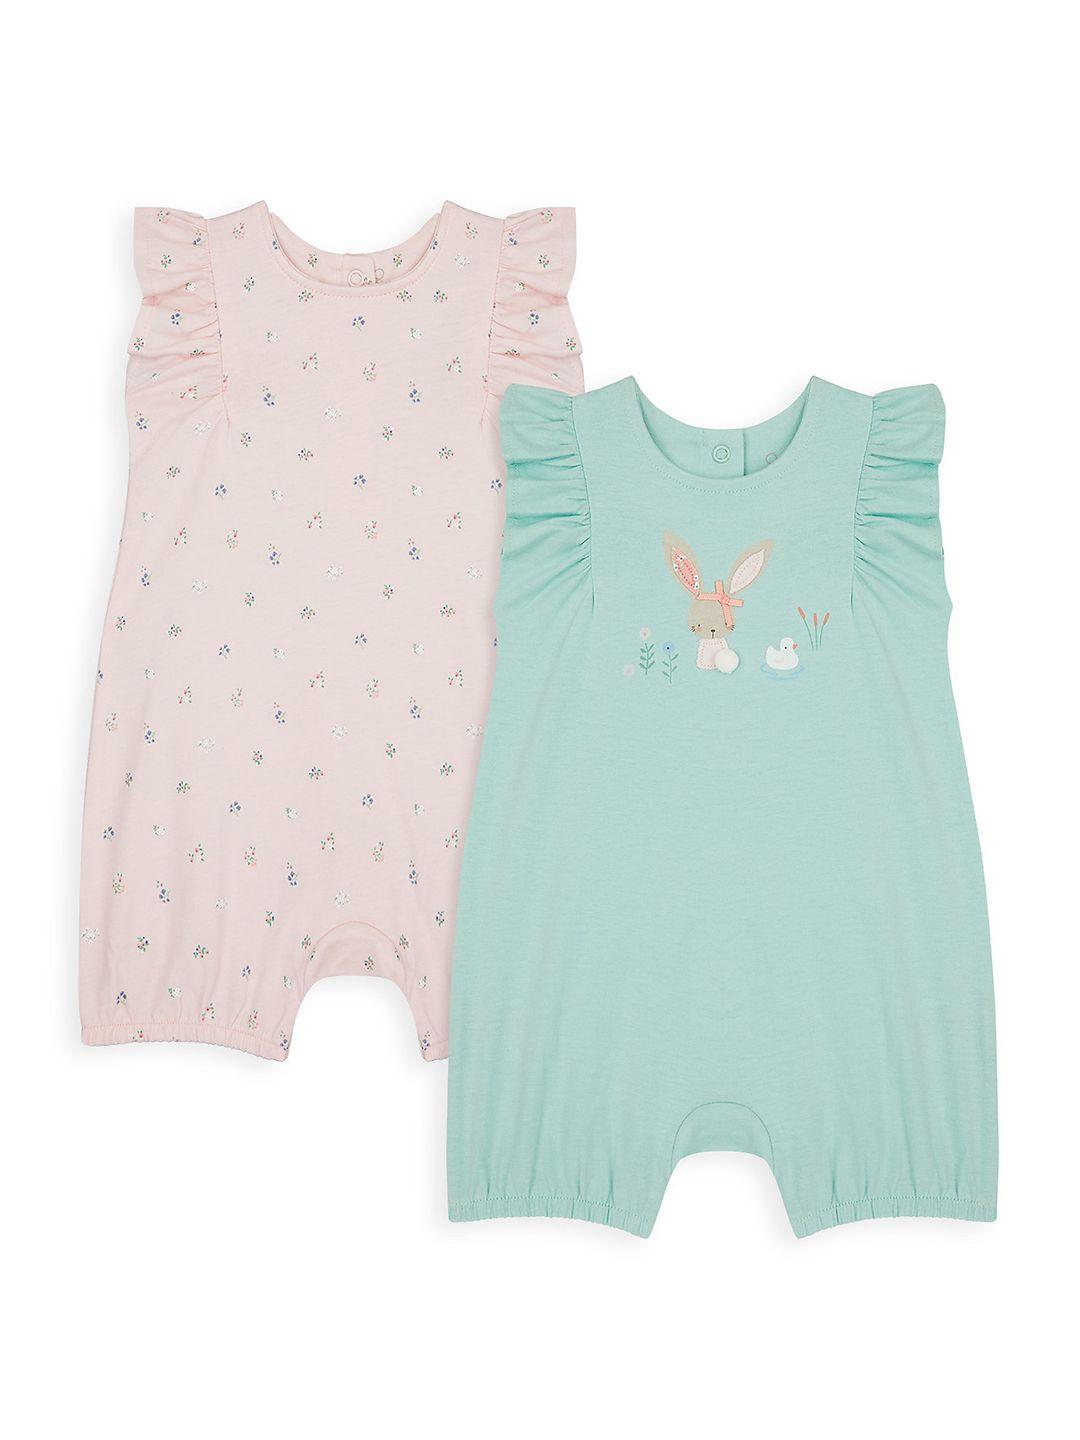 mothercare-infant-girls-pack-of-2-green-&-pink-printed-rompers